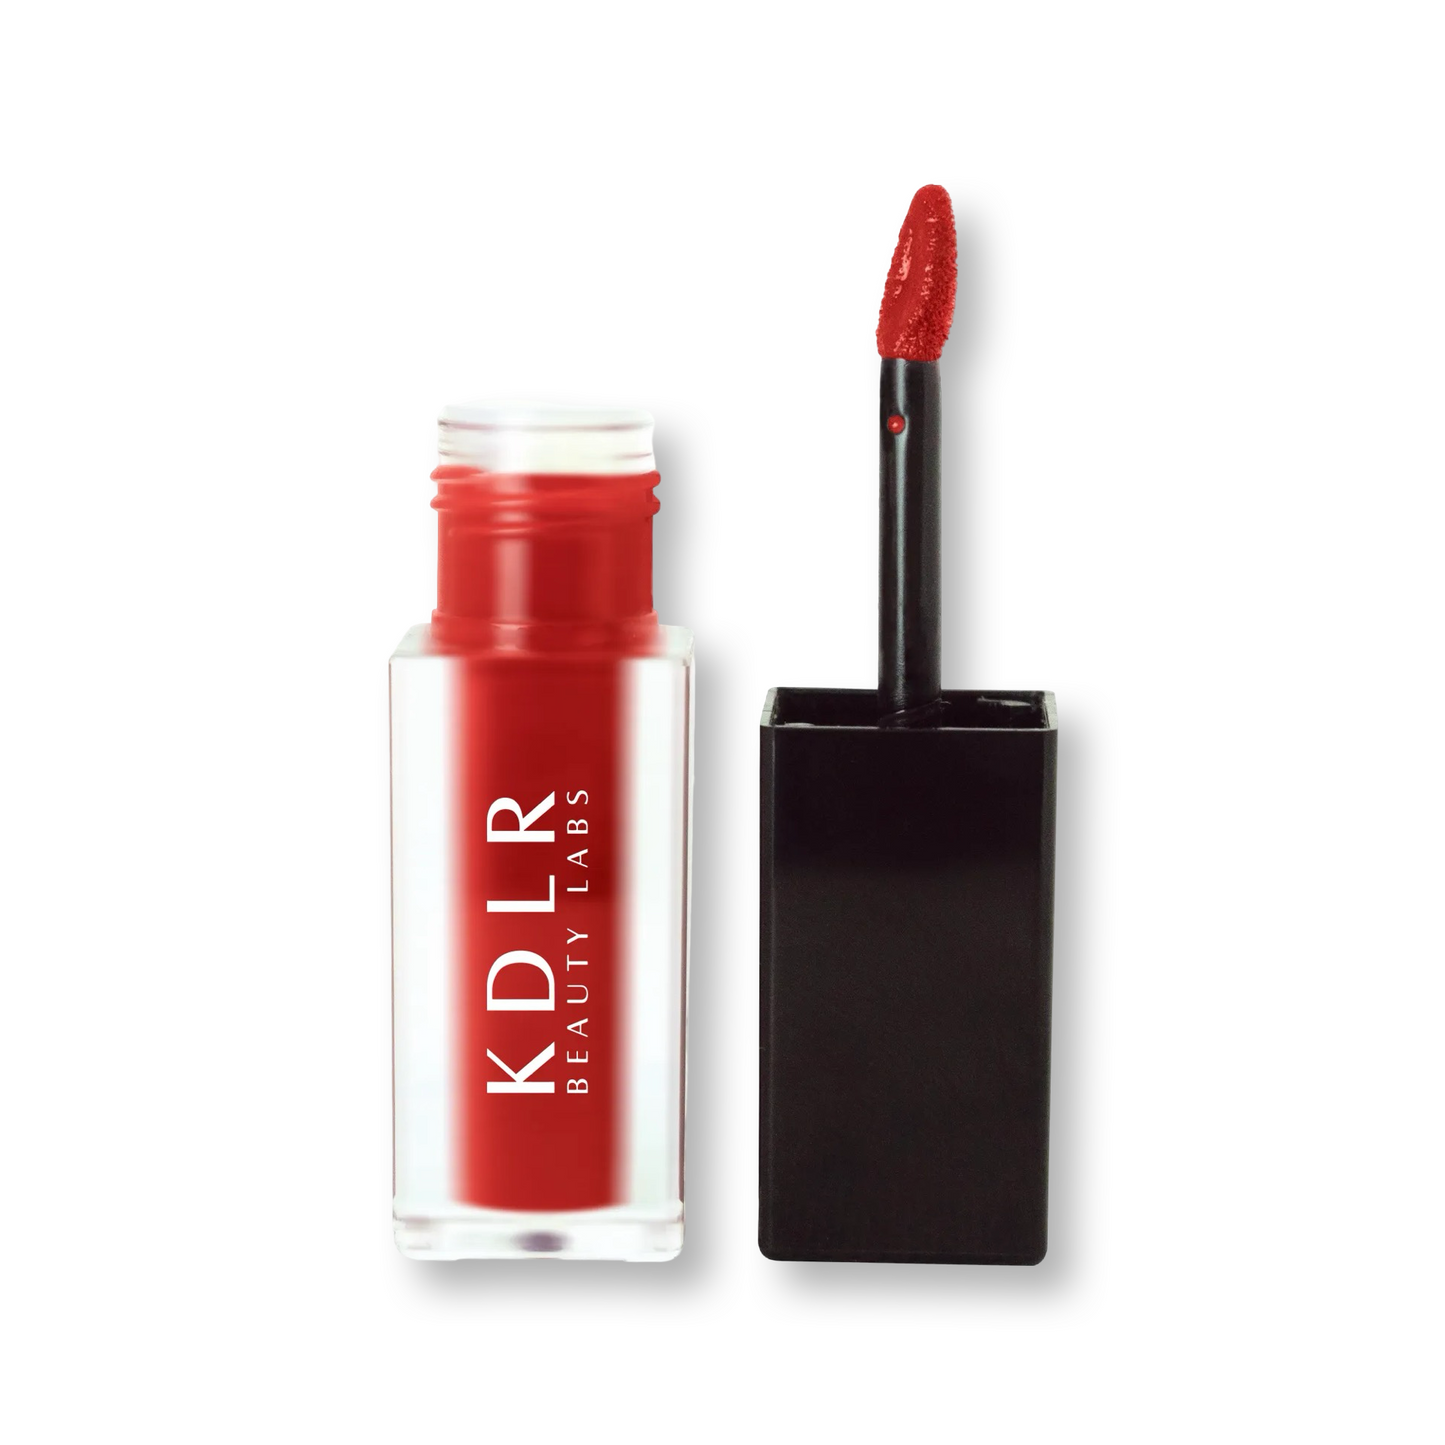 KDLR Beauty Labs' SatinMatte Lip Stain, featuring enduring color with a velvety matte finish for all-day wear, buildable shades, unique doe-shaped applicator, vitamin E enriched, and an eco-friendly, vegan formula. Variant: Velvet Red 